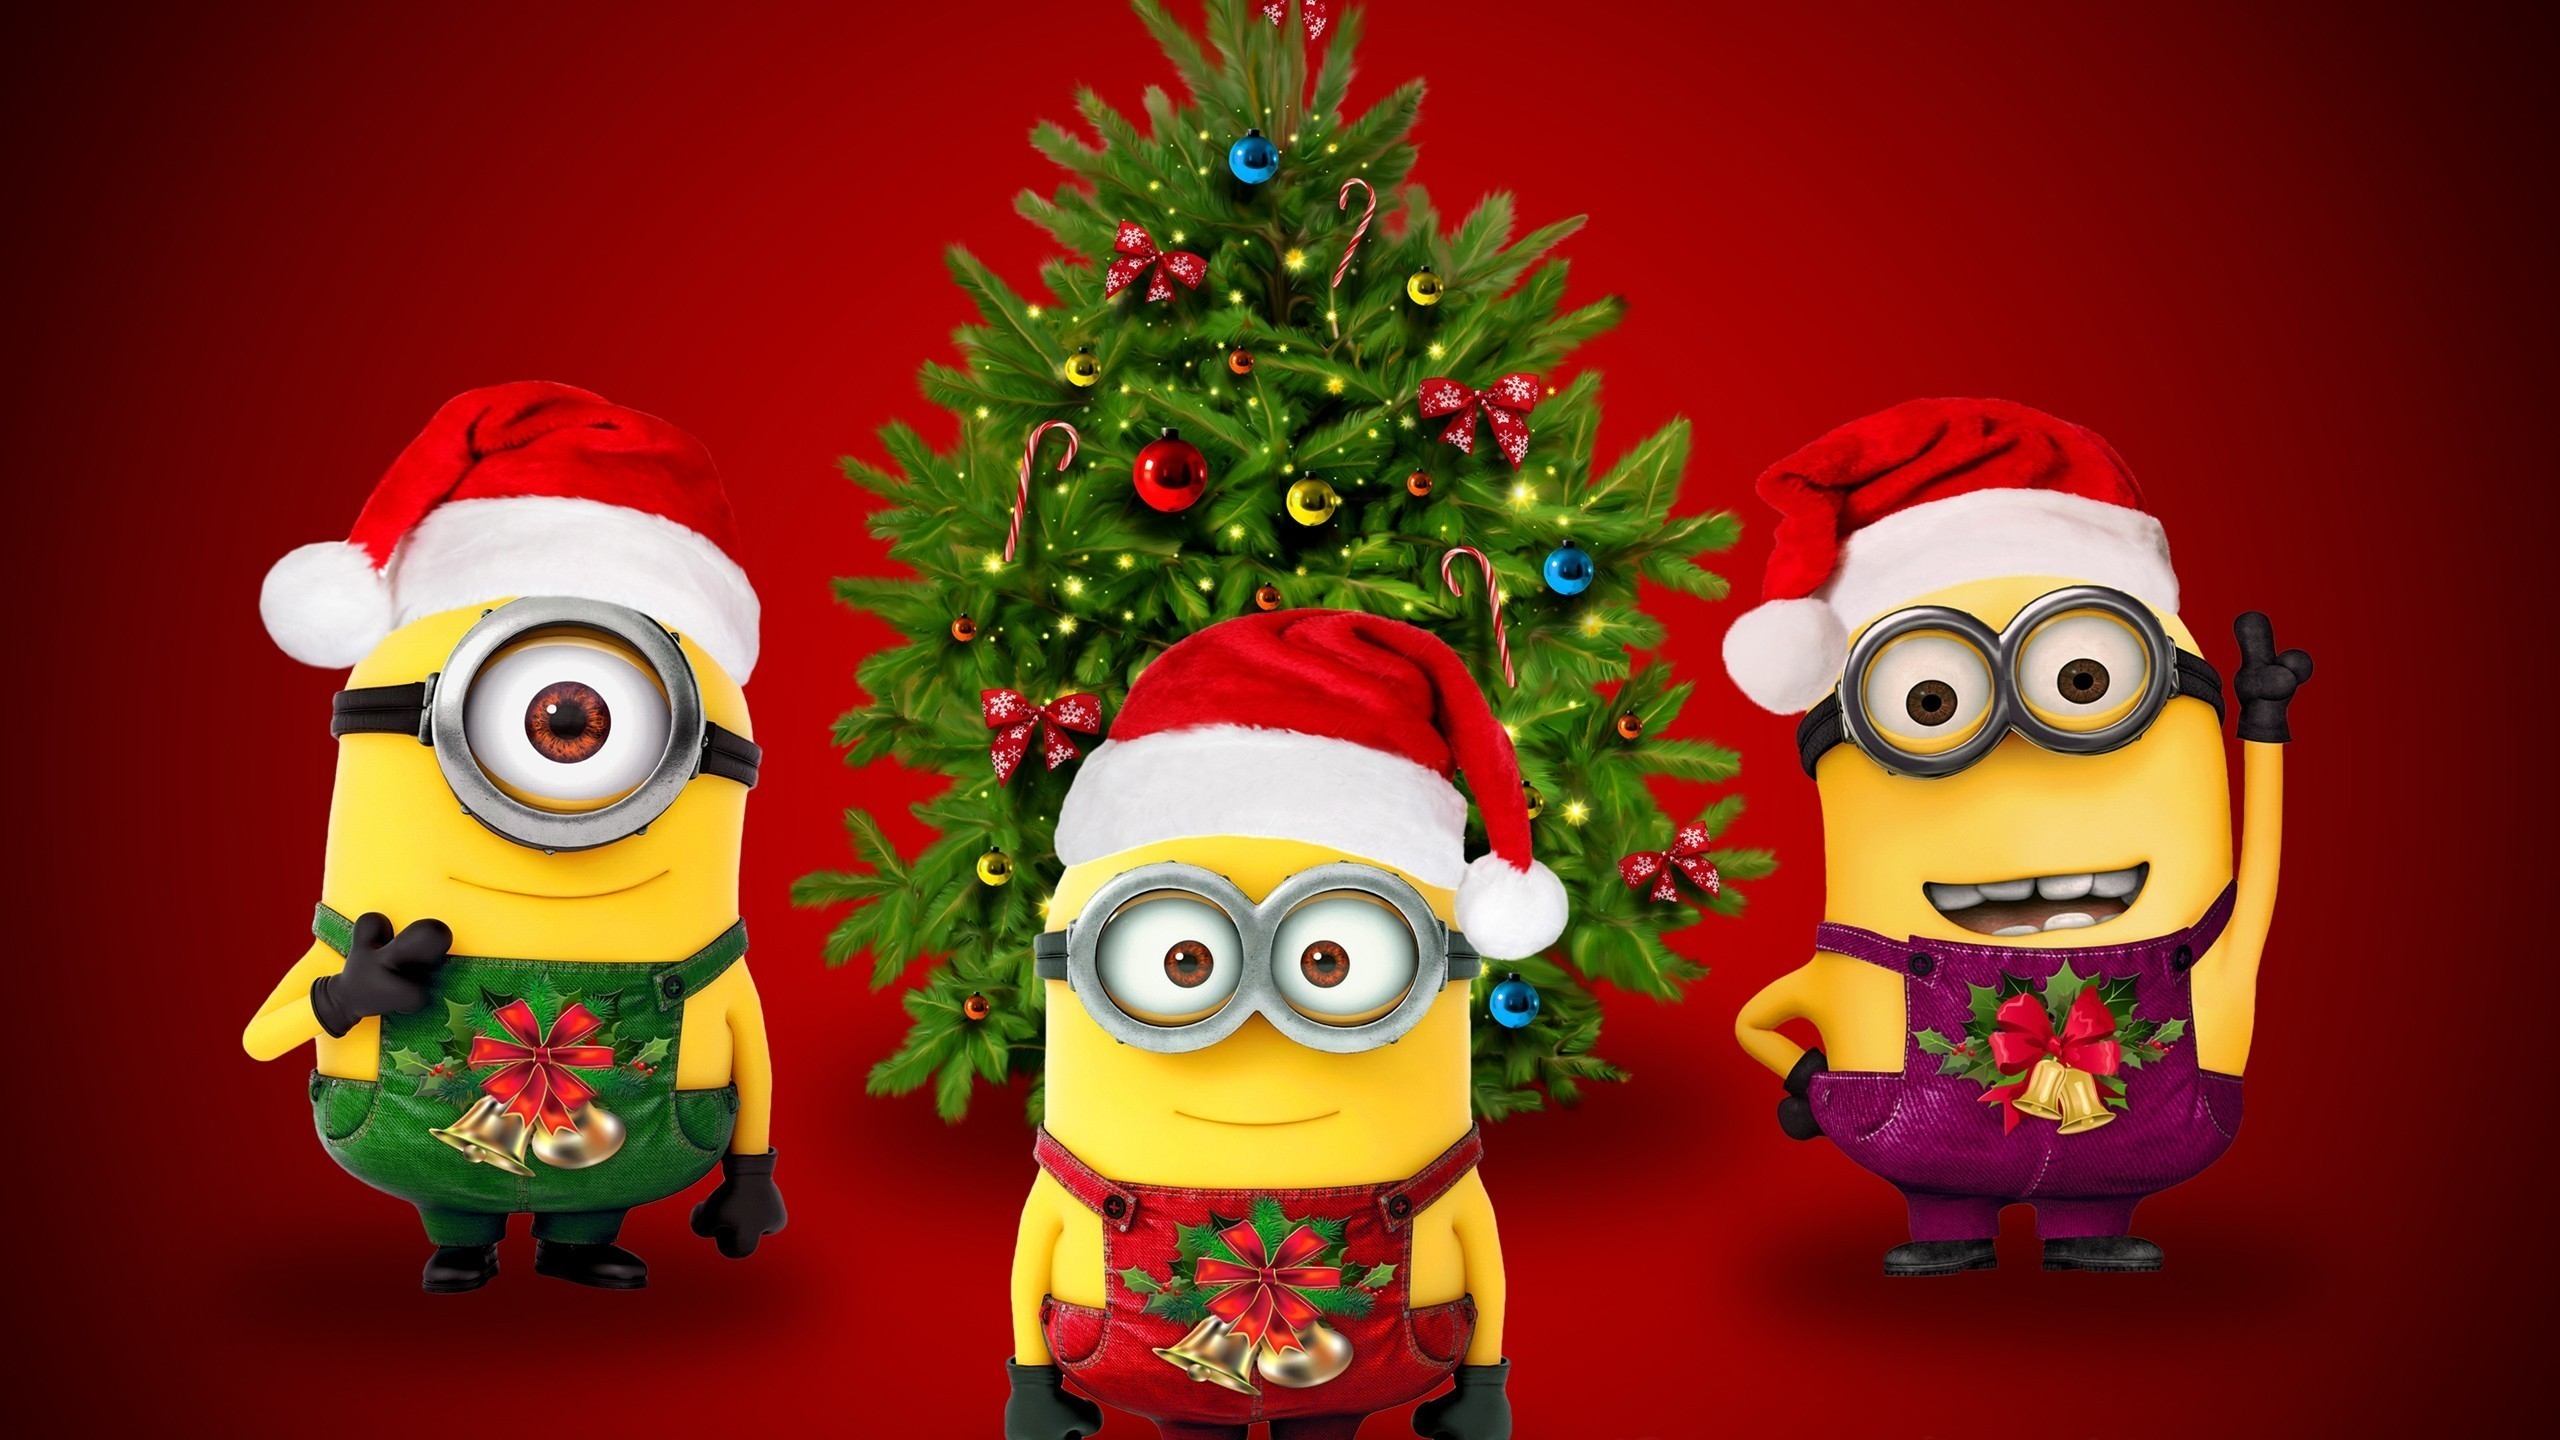 Christmas & Minions for 2560x1440 HDTV resolution